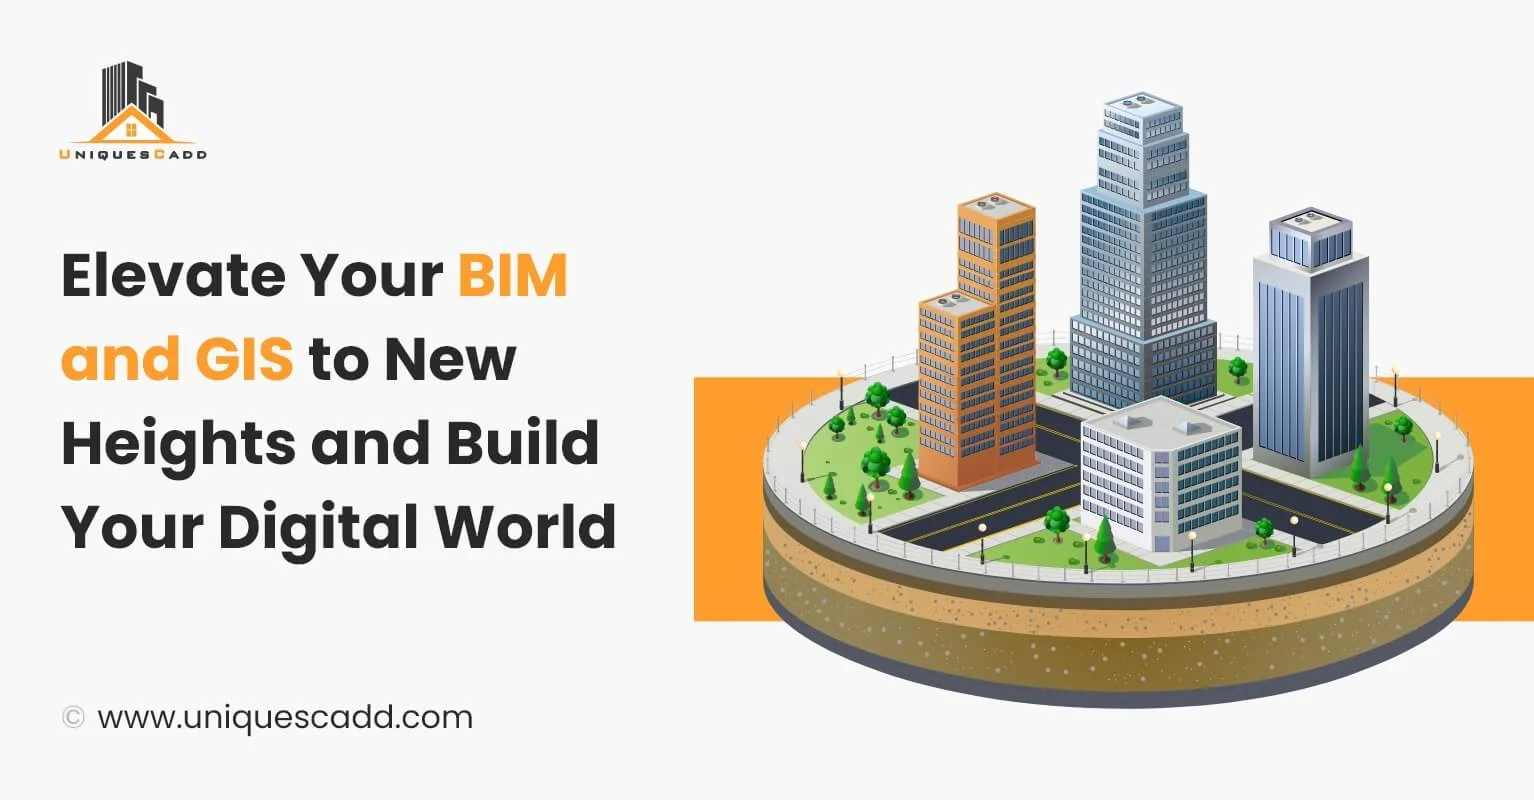 Elevate Your BIM and GIS to New Heights and Build Your Digital World